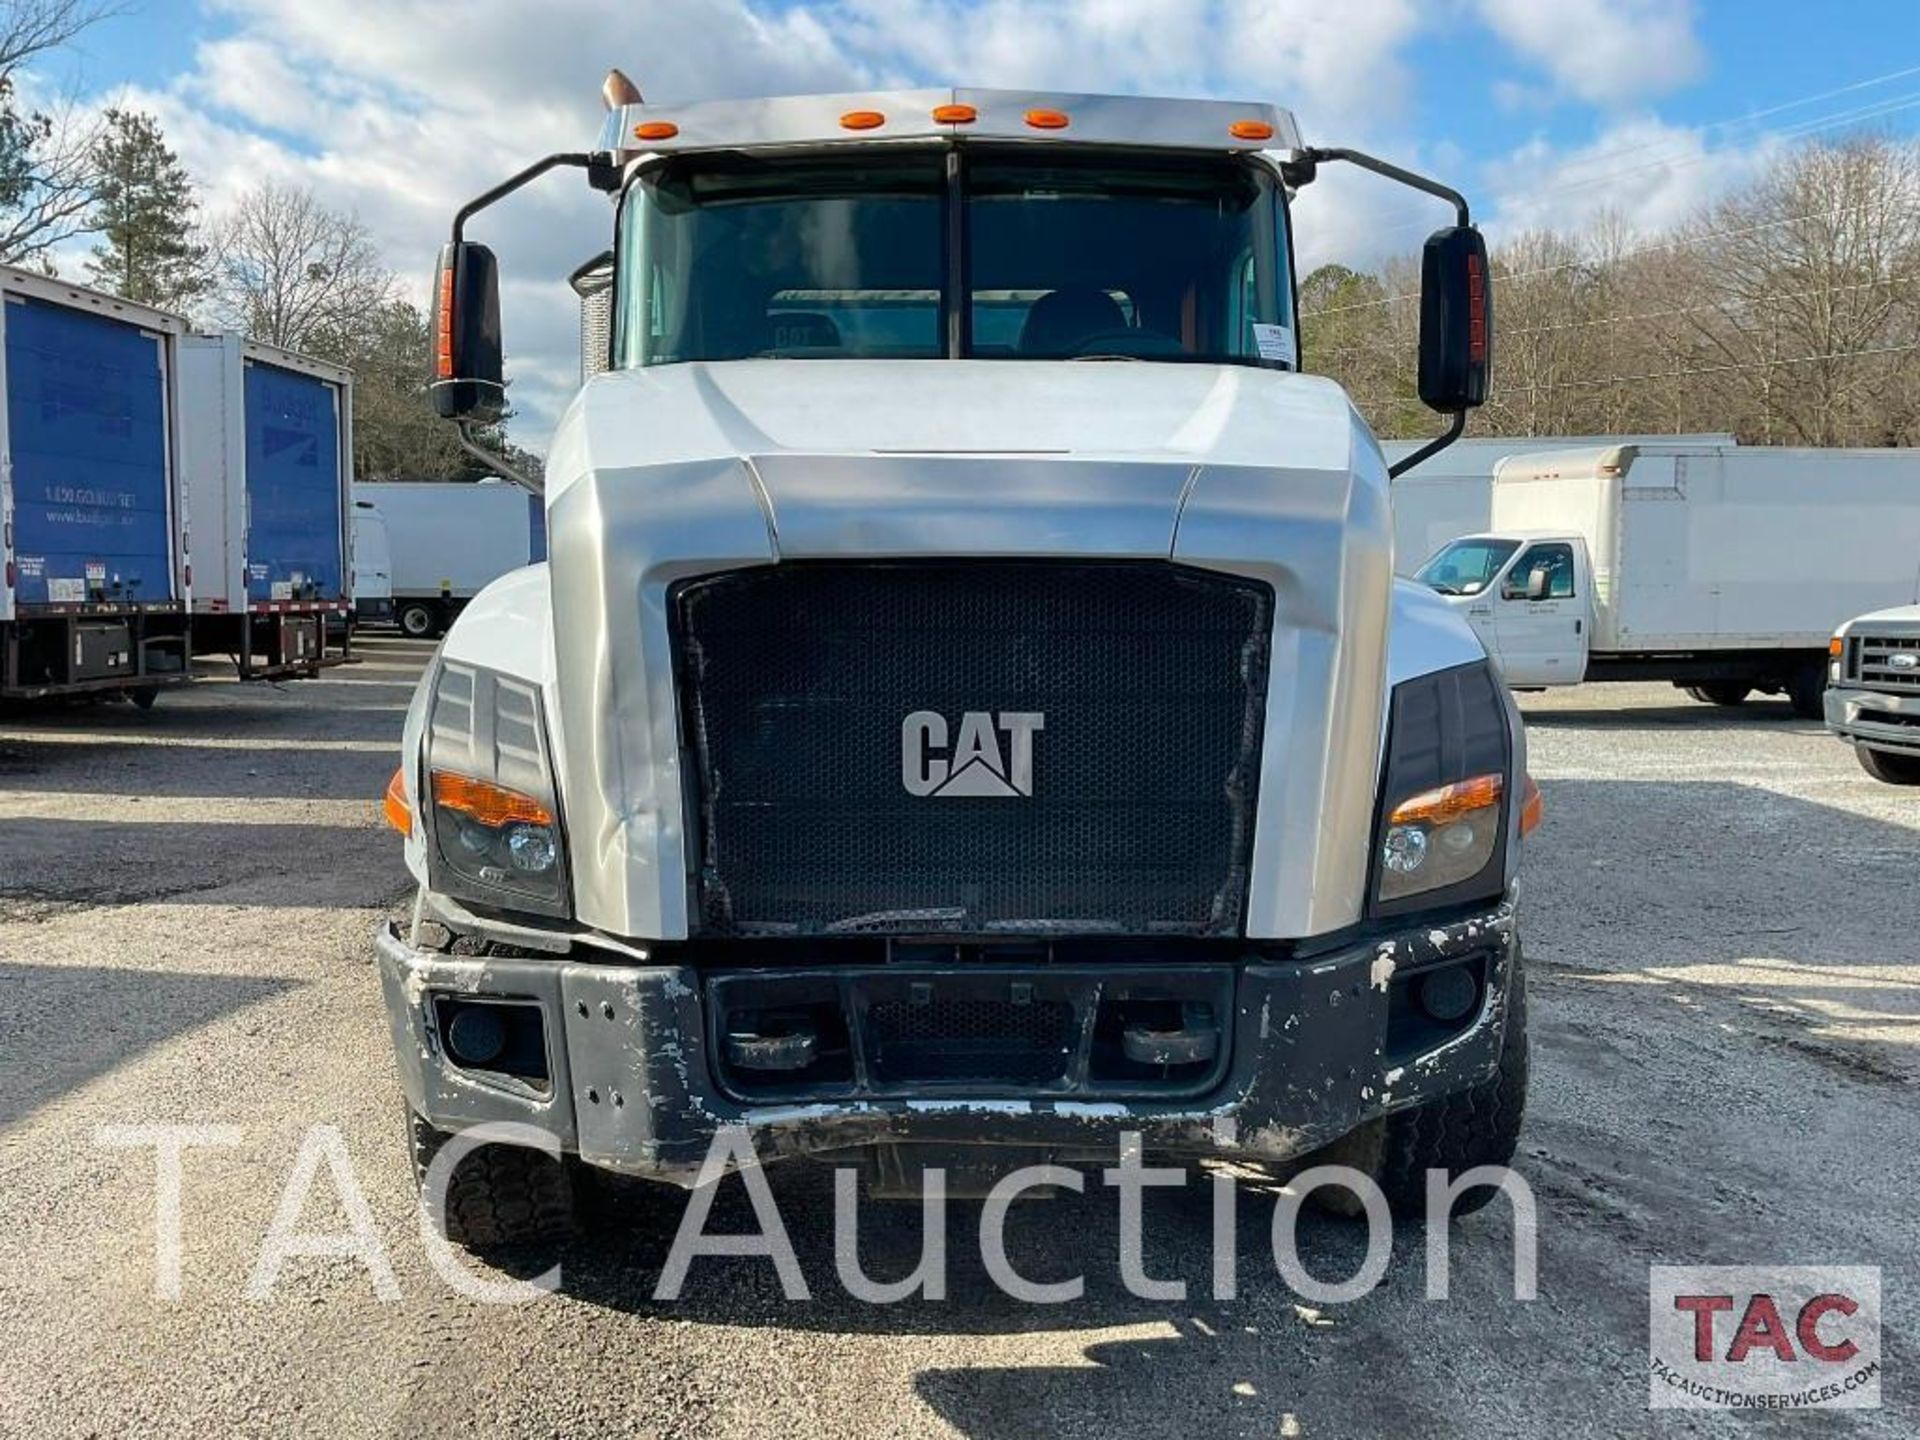 2012 CAT CT660S Roll-Off Truck W/ 20yd Dumpster - Image 16 of 148